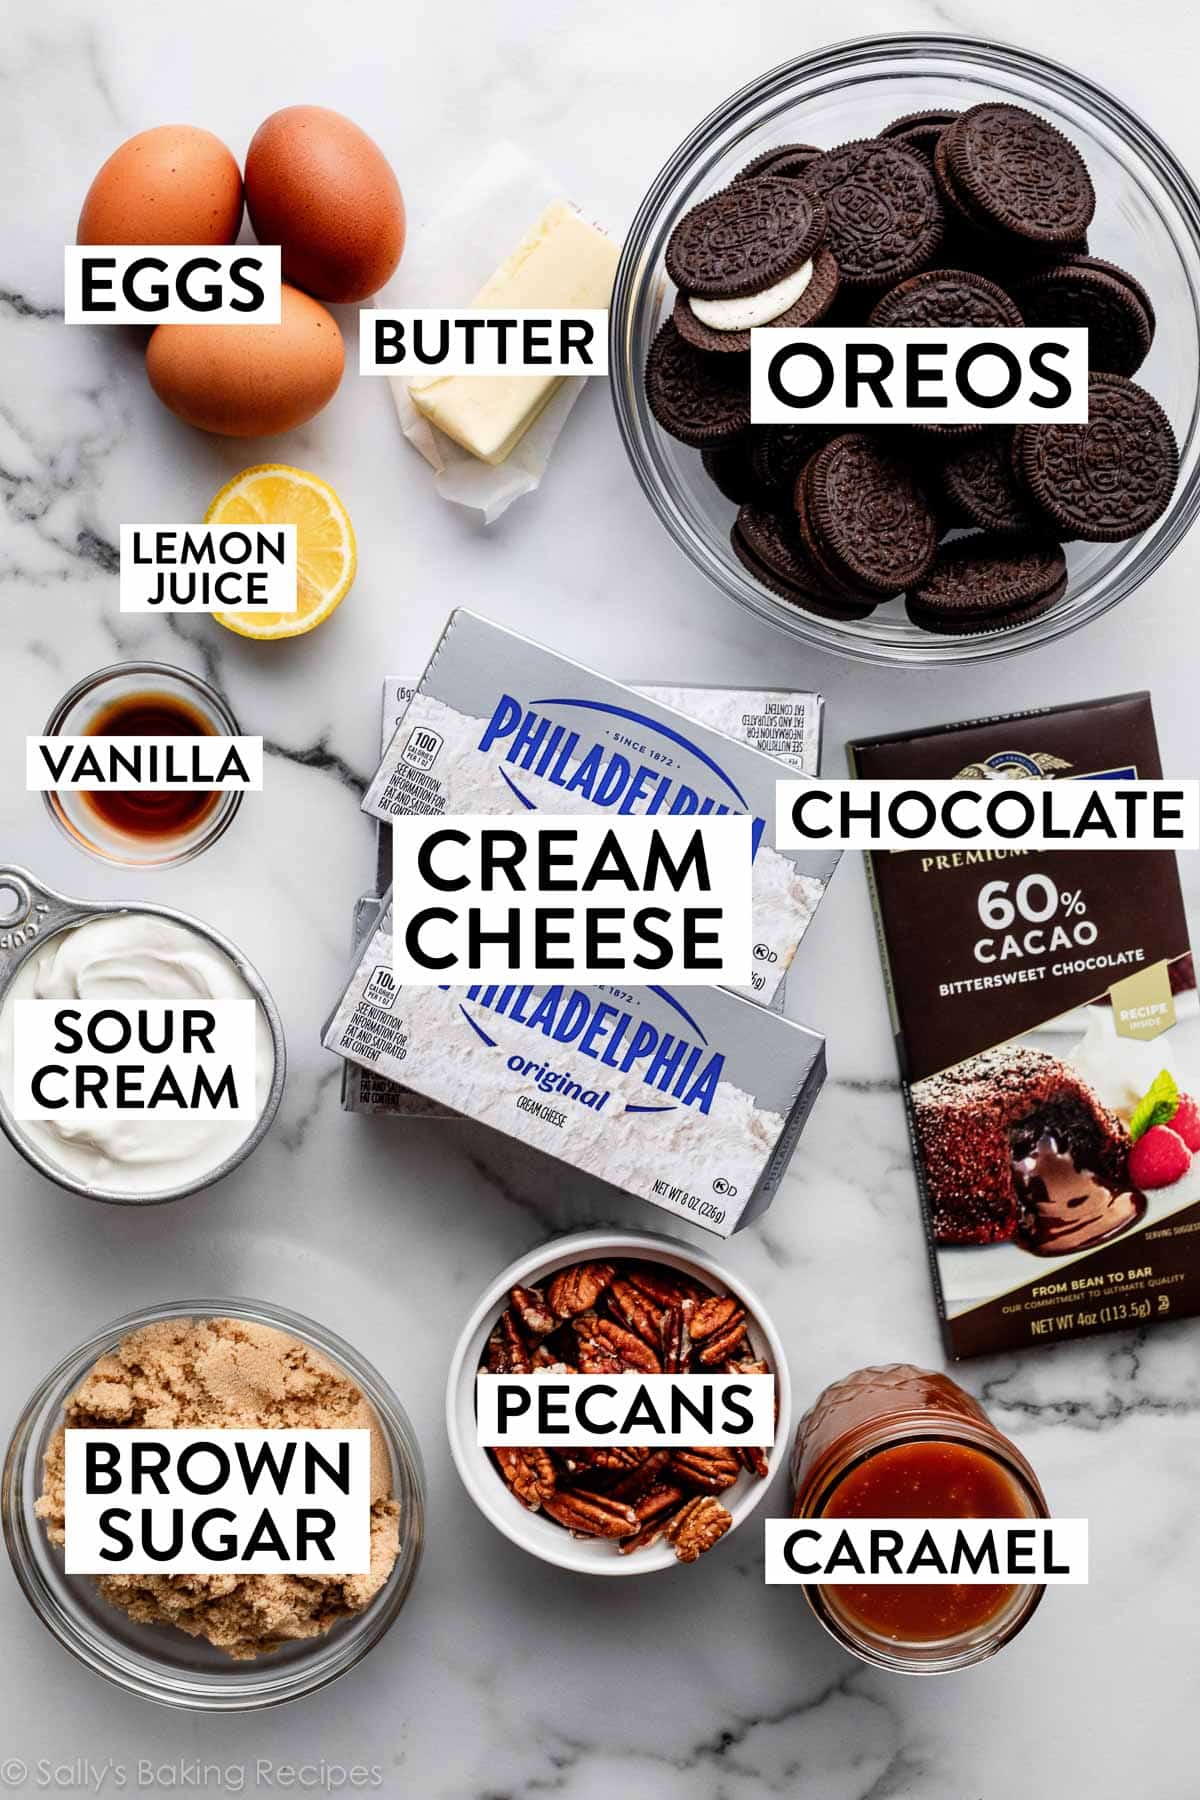 ingredients on counter including measured out Oreos in bowl, butter, eggs, half lemon, vanilla, sour cream, brown sugar, cream cheese blocks, and chocolate bar.